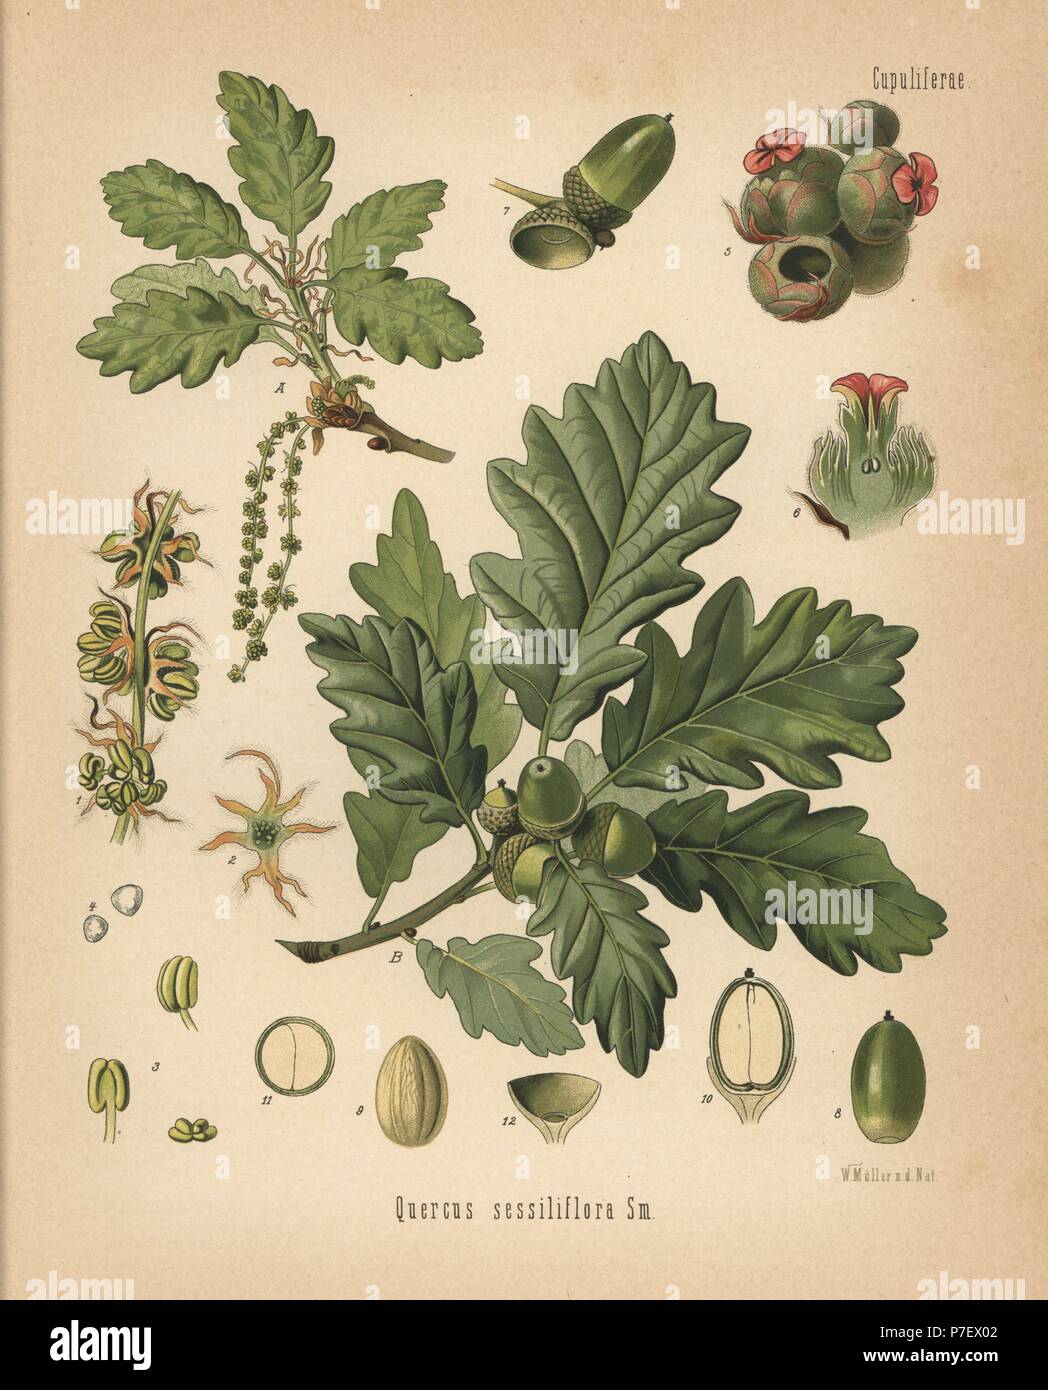 Sessile oak, Quercus petraea (Quercus sessiliflora). Chromolithograph after a botanical illustration by Walther Muller from Hermann Adolph Koehler's Medicinal Plants, edited by Gustav Pabst, Koehler, Germany, 1887. Stock Photo